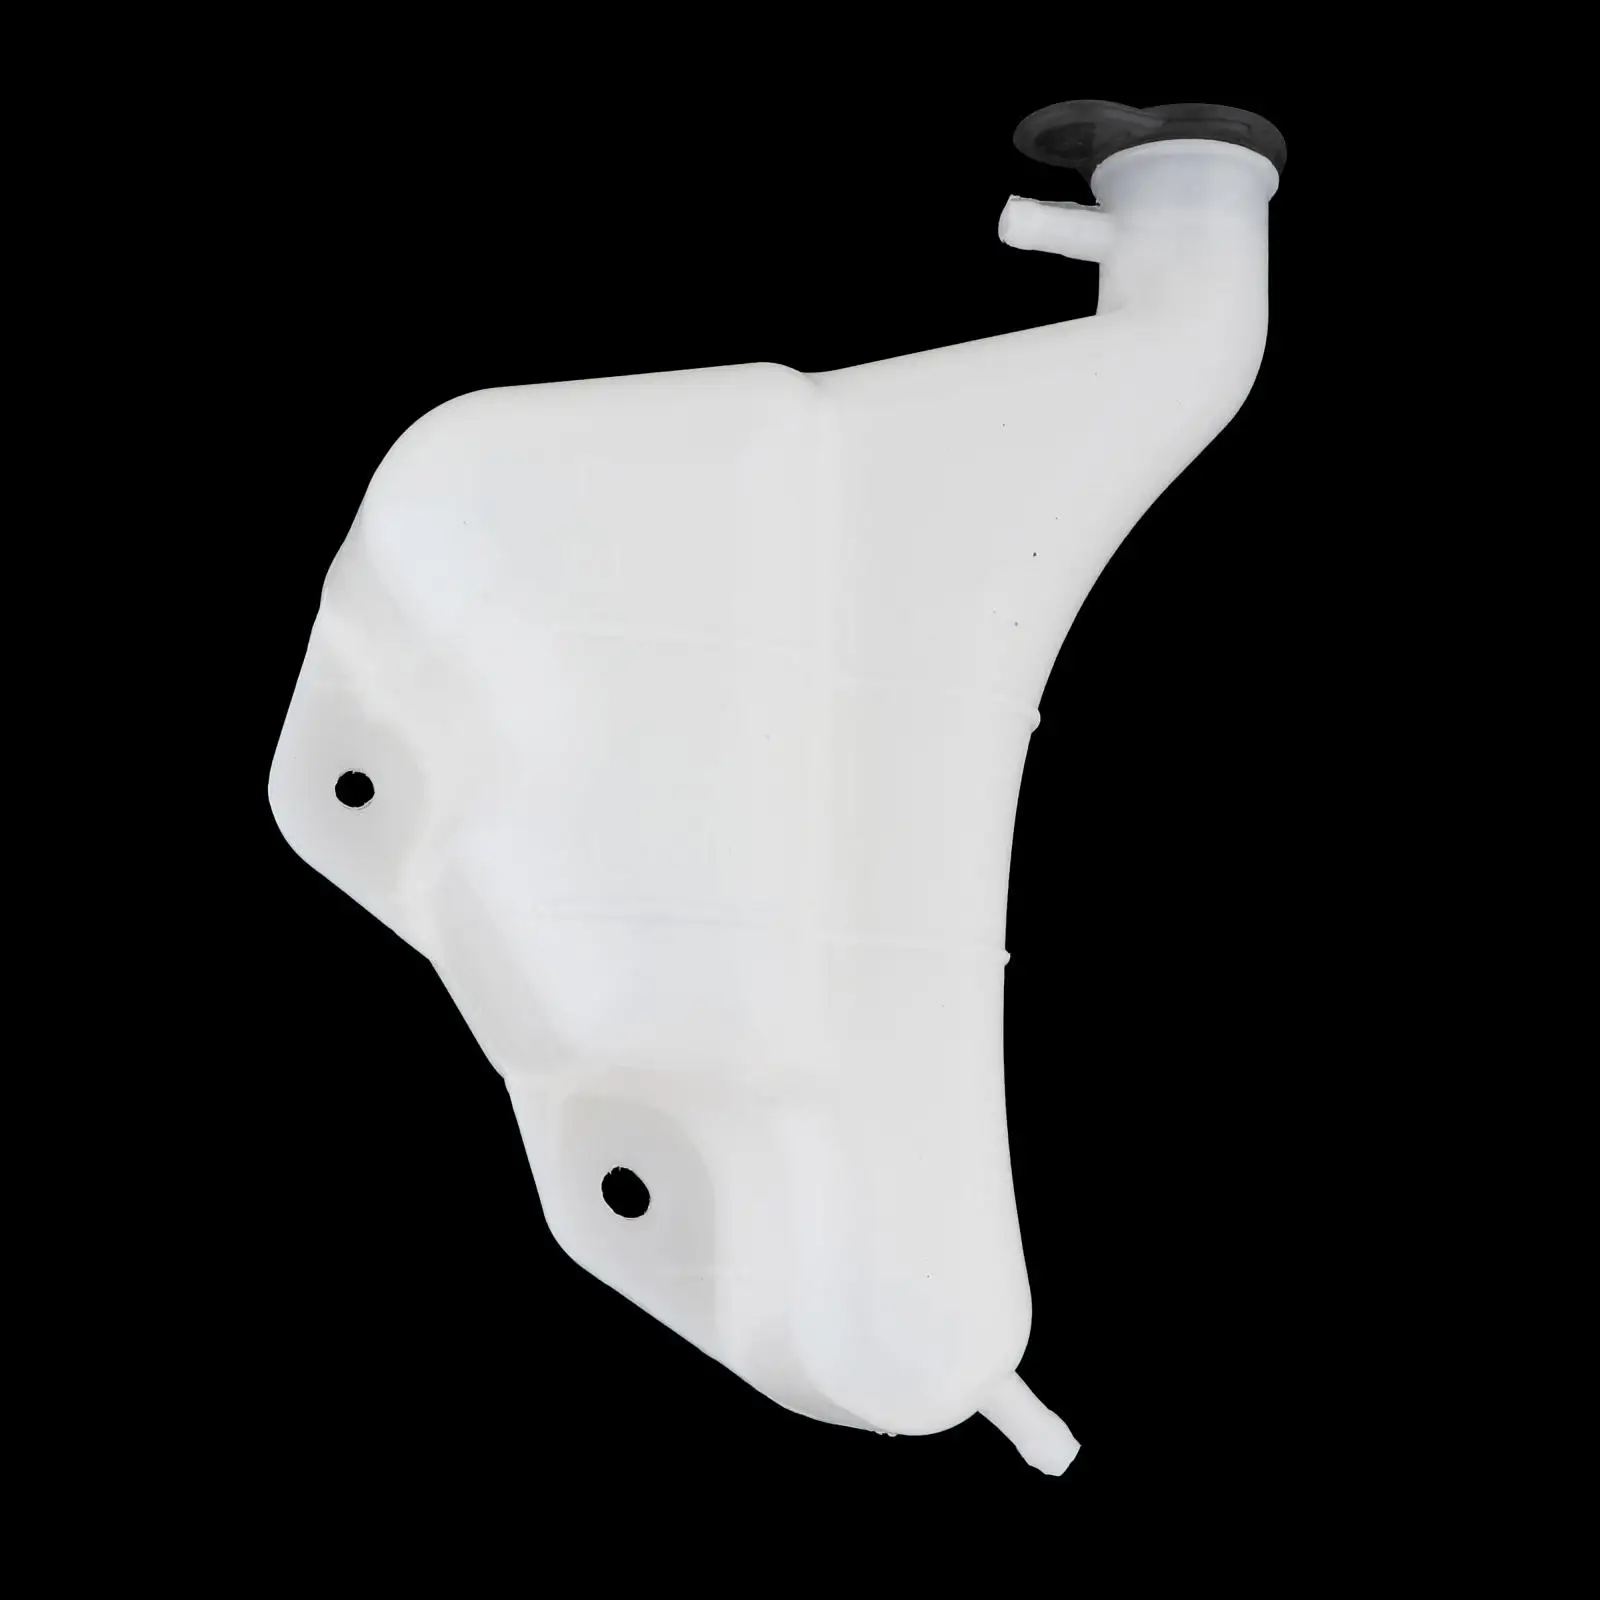 Overflow Coolant Radiator Tank Reservoir, Fit for Yamaha Raptor 700 2011 2009 2007 Replacement Parts Accessories